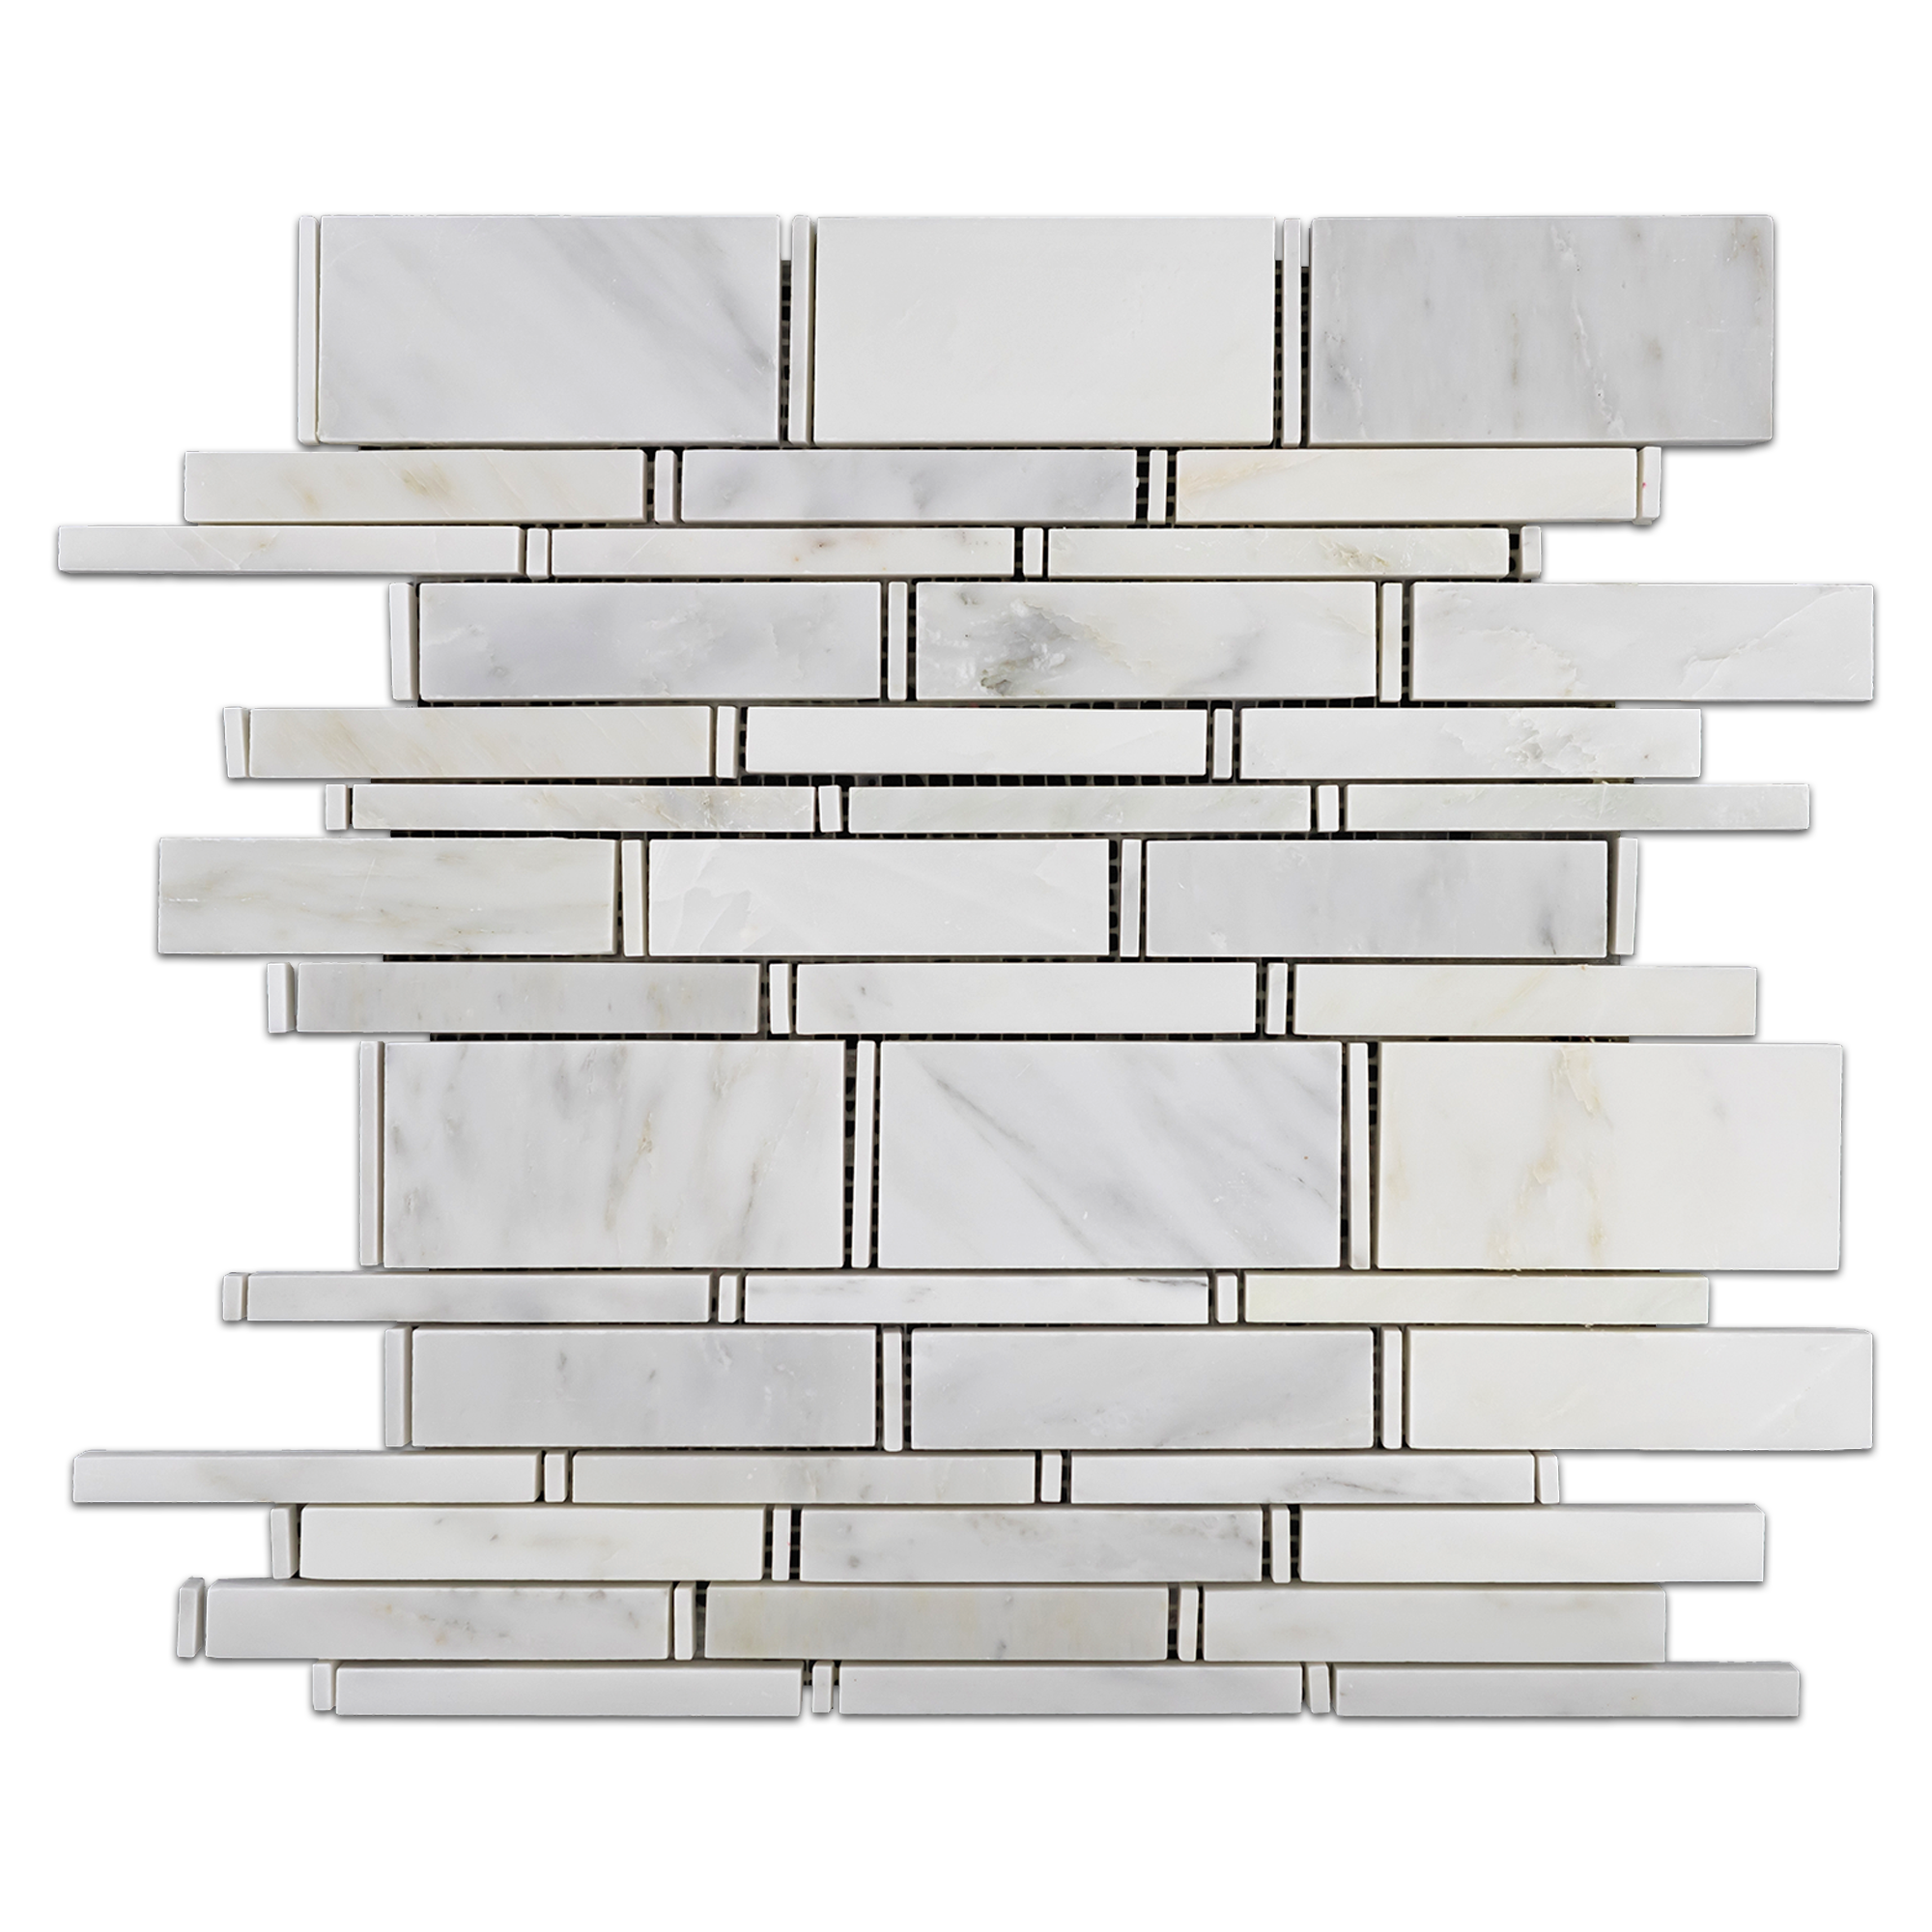 Elon Pearl White Marble Random Strip Field Mosaic 12.375x12.5x0.375 Polished Tile - Surface Group Online Store